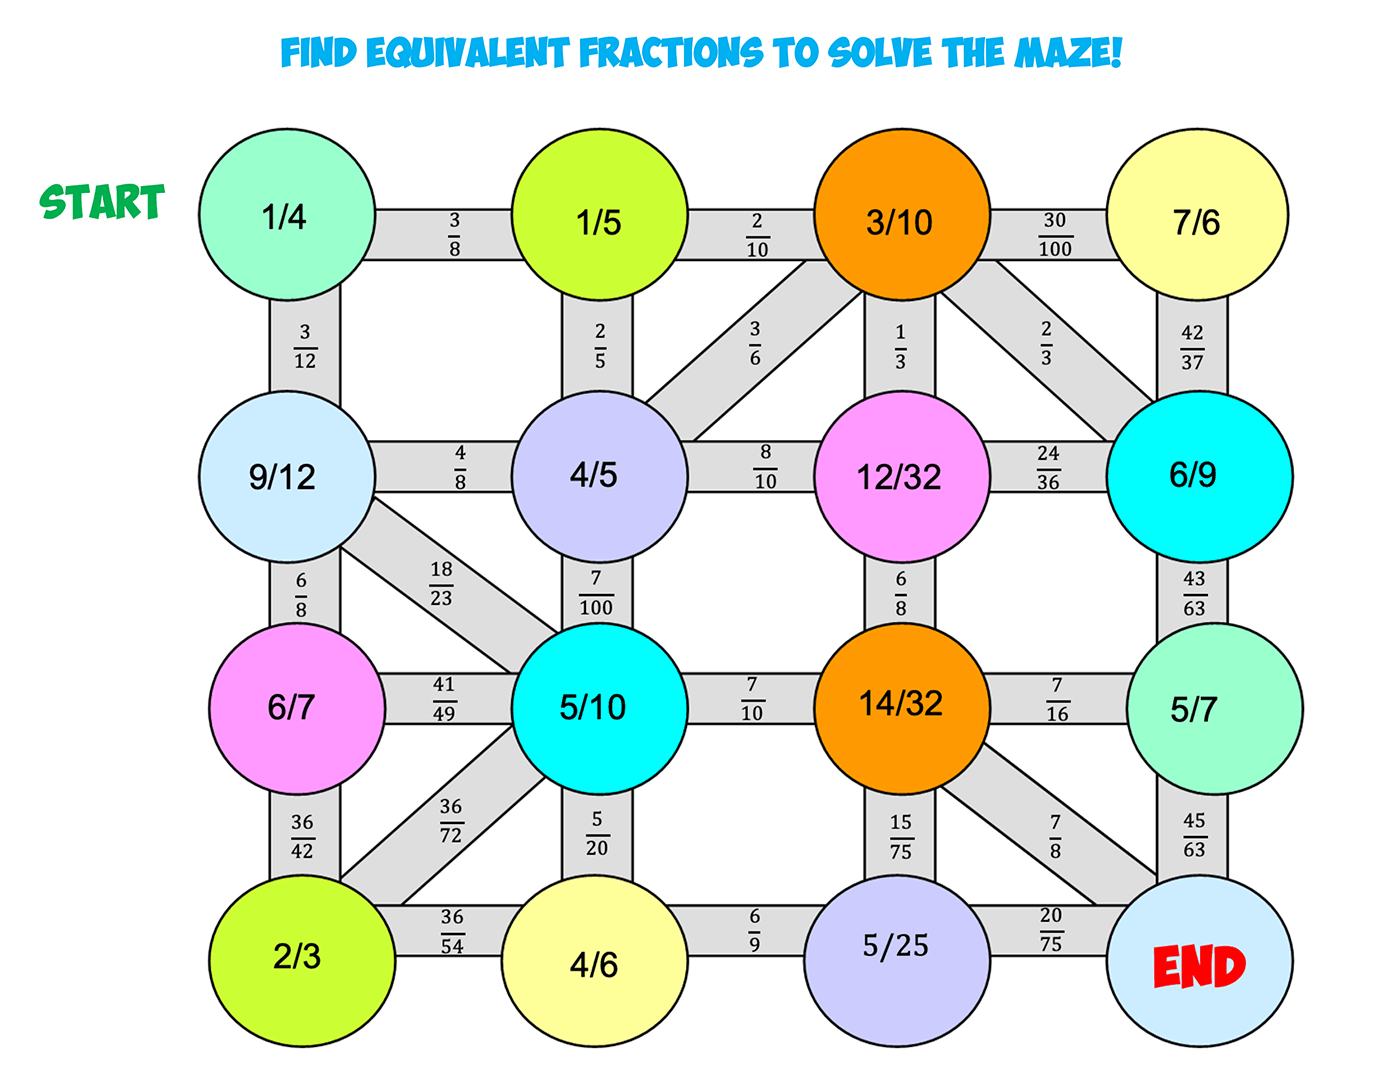 Equivalent fractions MazeD